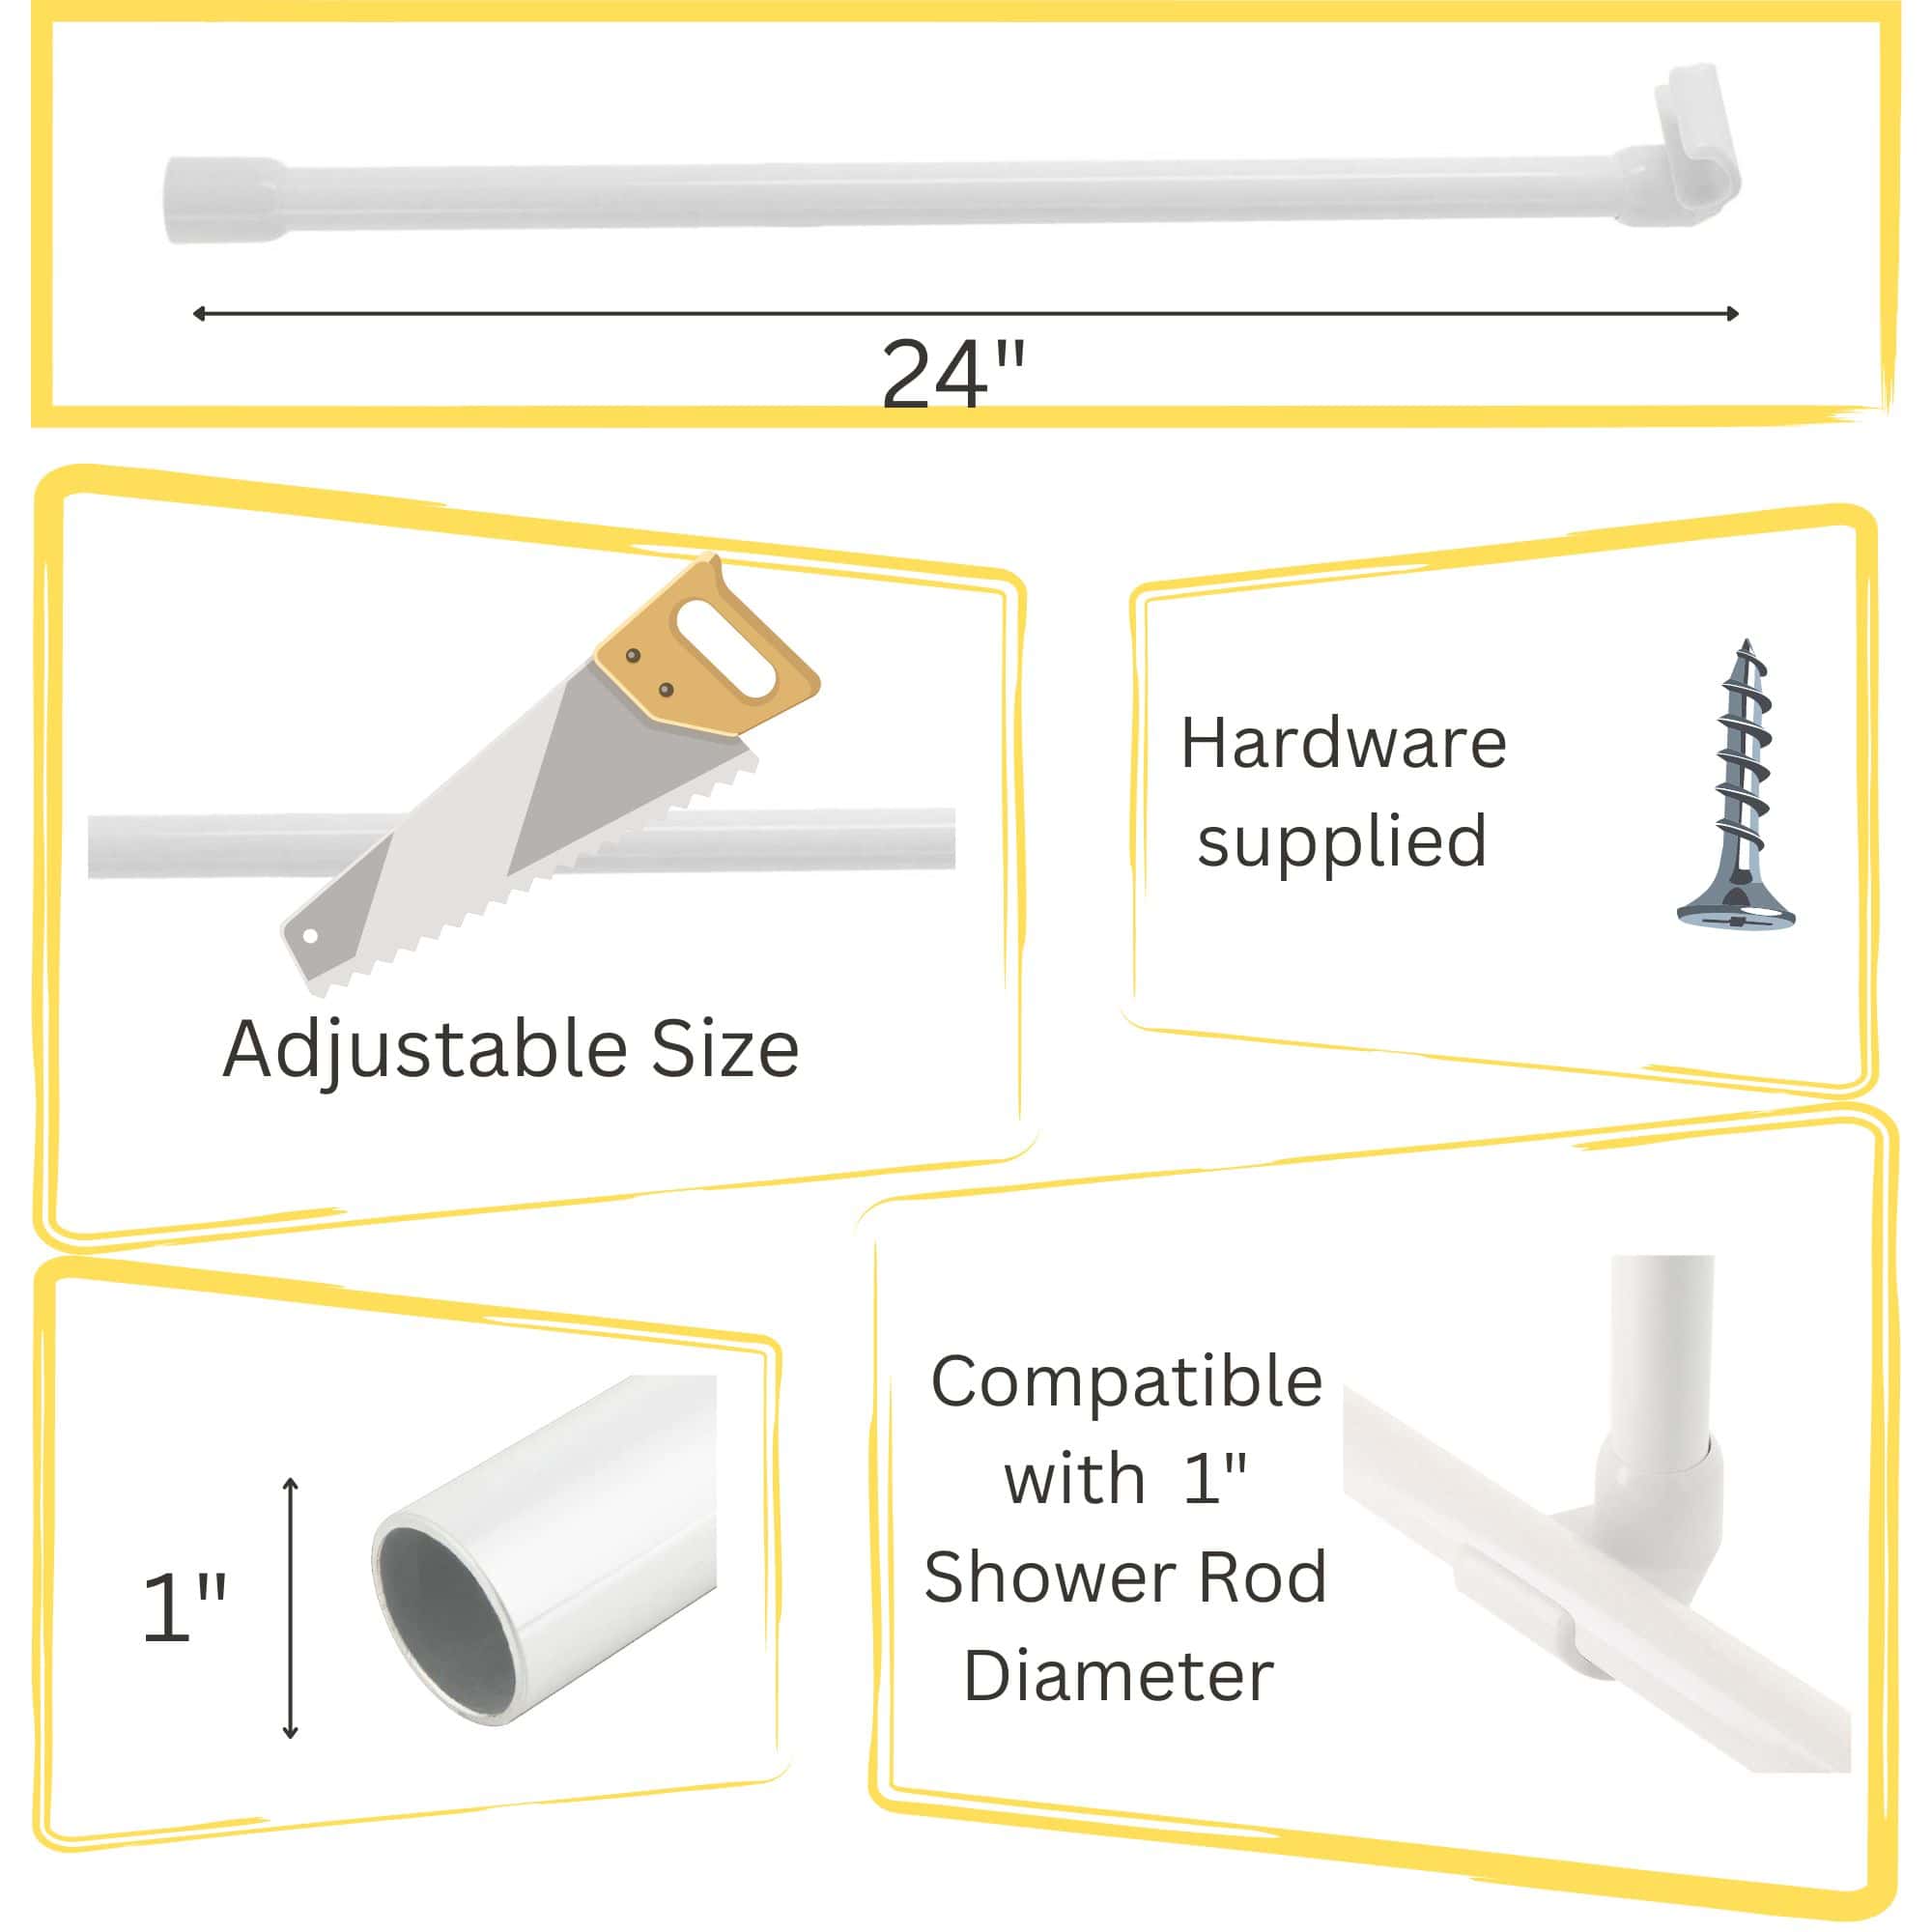 white ceiling support rod, including adjustable size and compatibility with 1 diameter shower rods